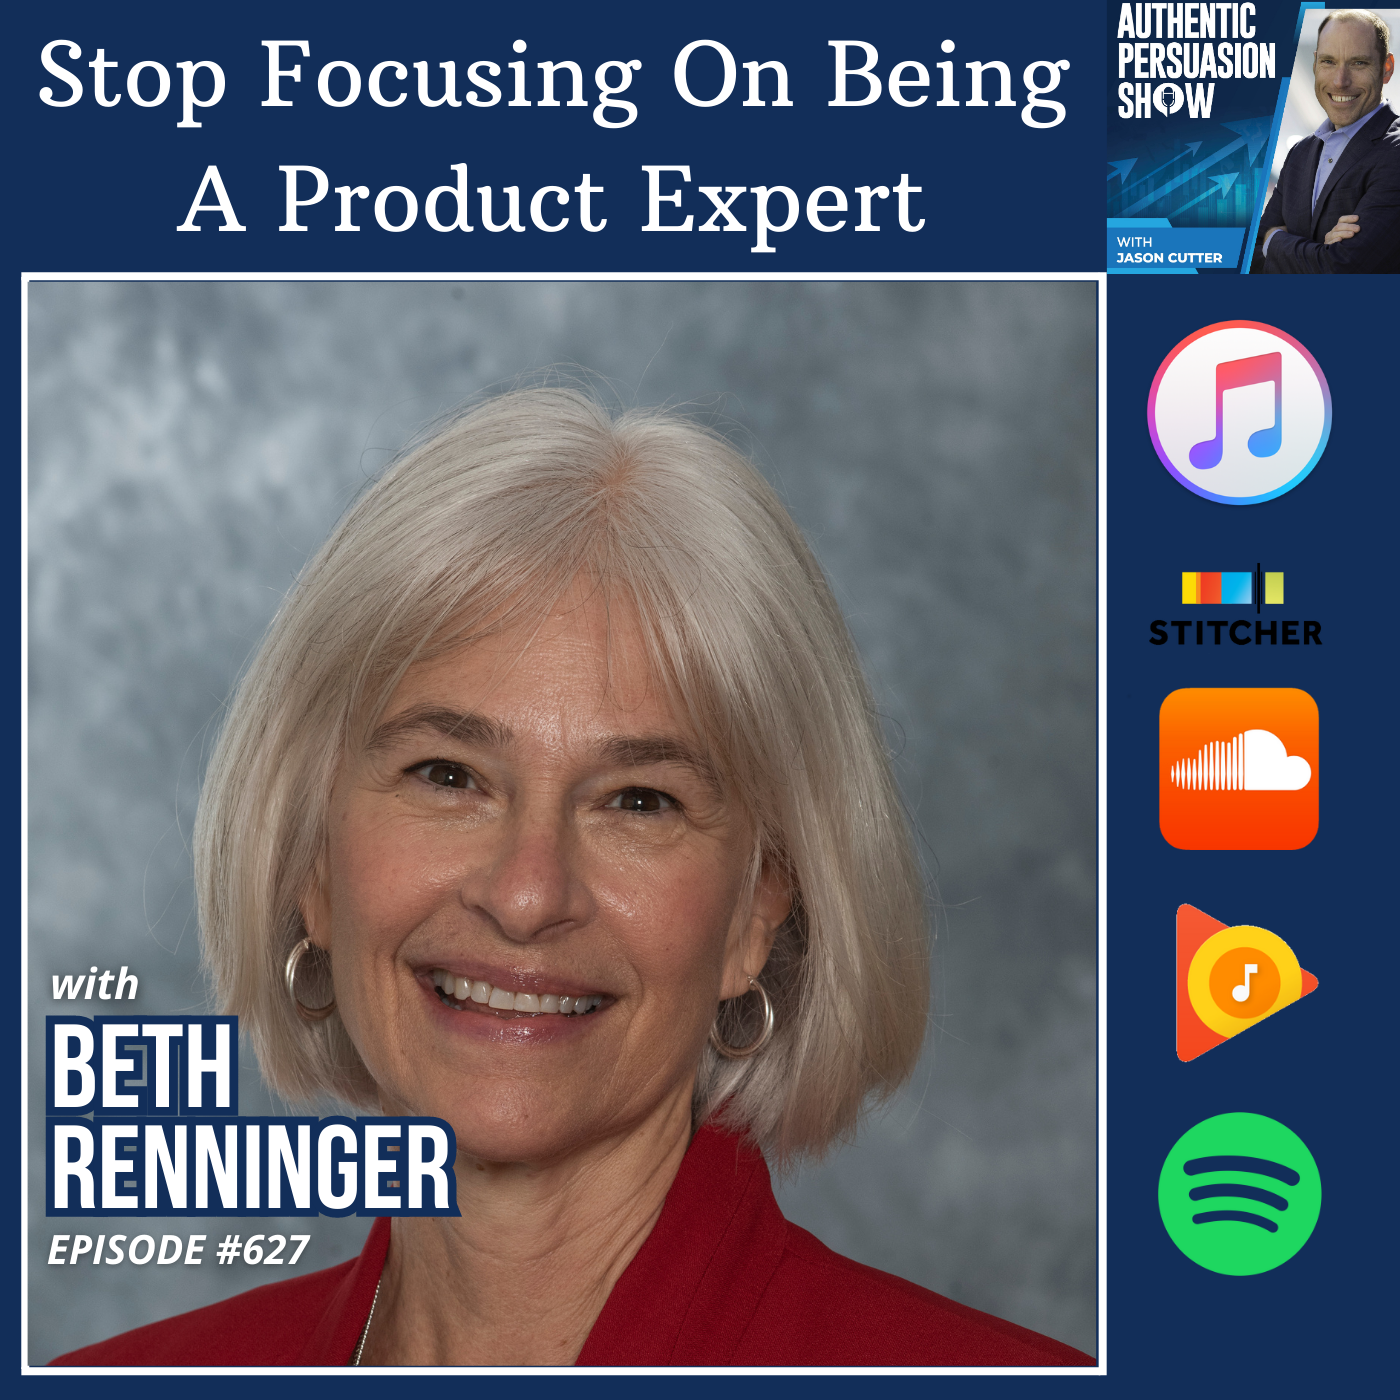 [627] Stop Focusing On Being A Product Expert, with Beth Renninger from University of South Carolina